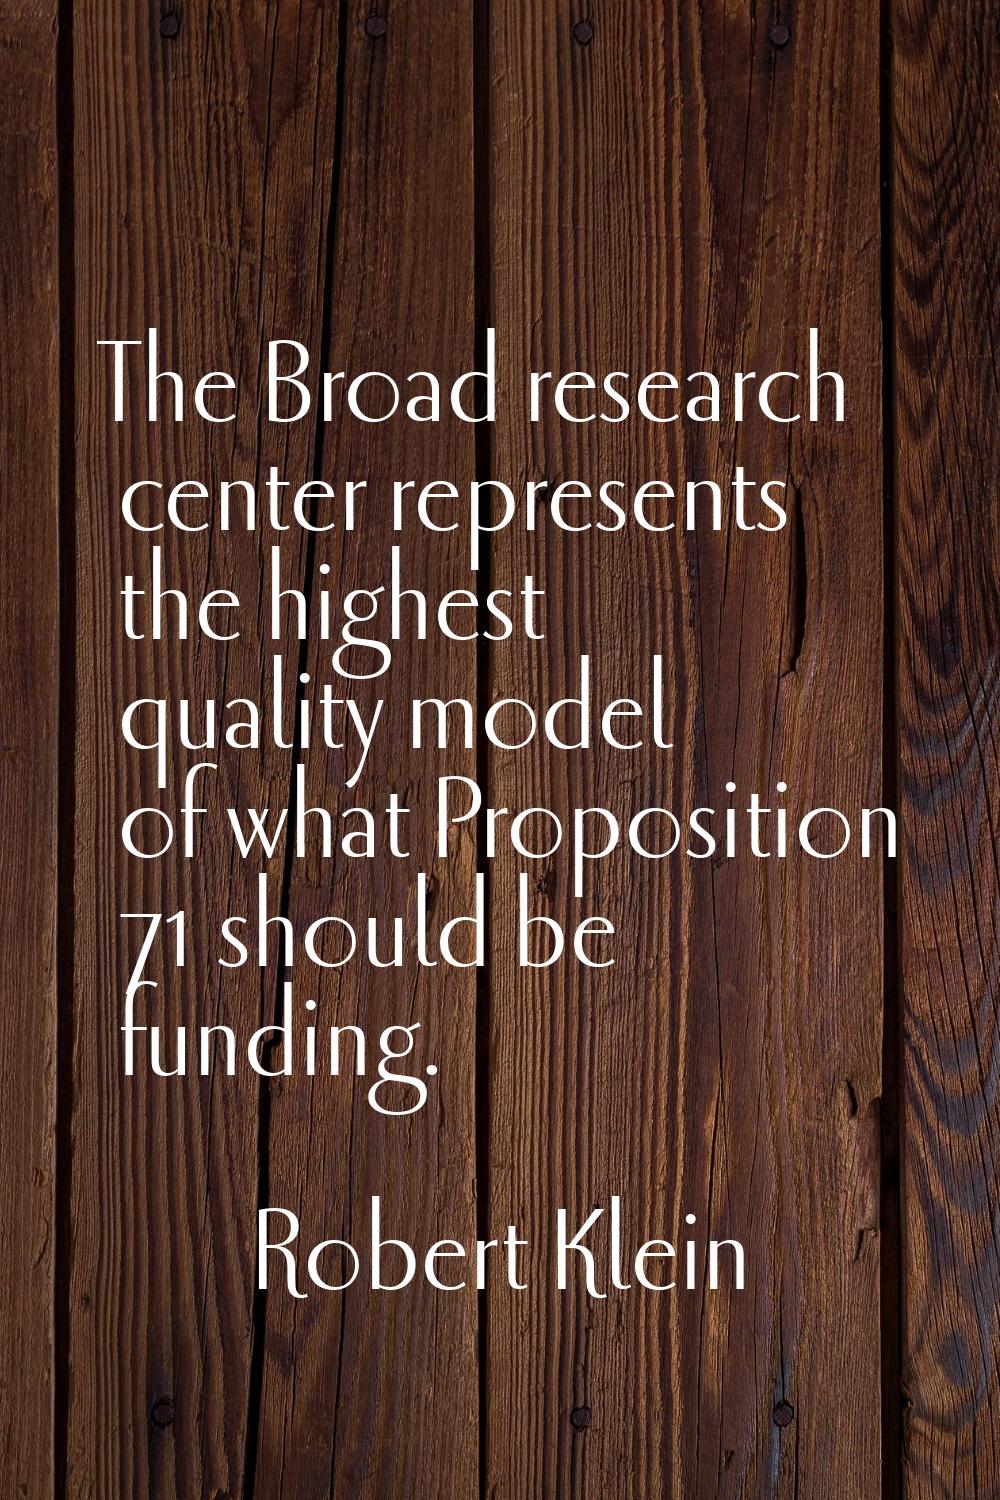 The Broad research center represents the highest quality model of what Proposition 71 should be fun